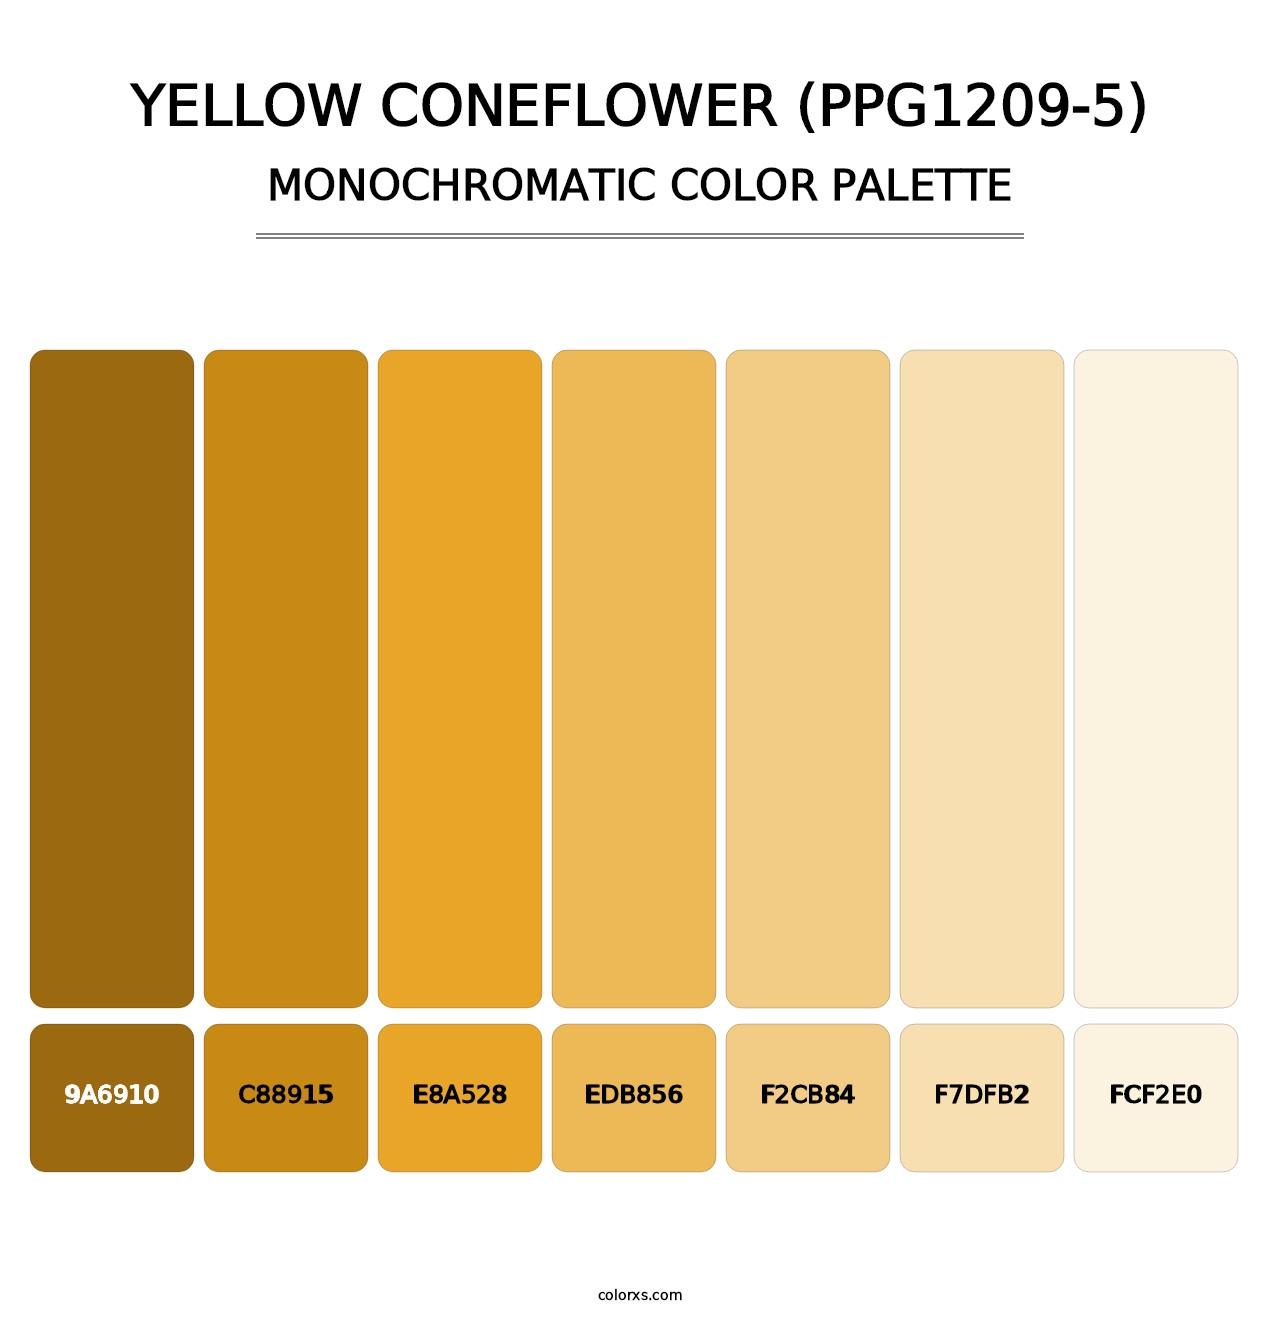 Yellow Coneflower (PPG1209-5) - Monochromatic Color Palette